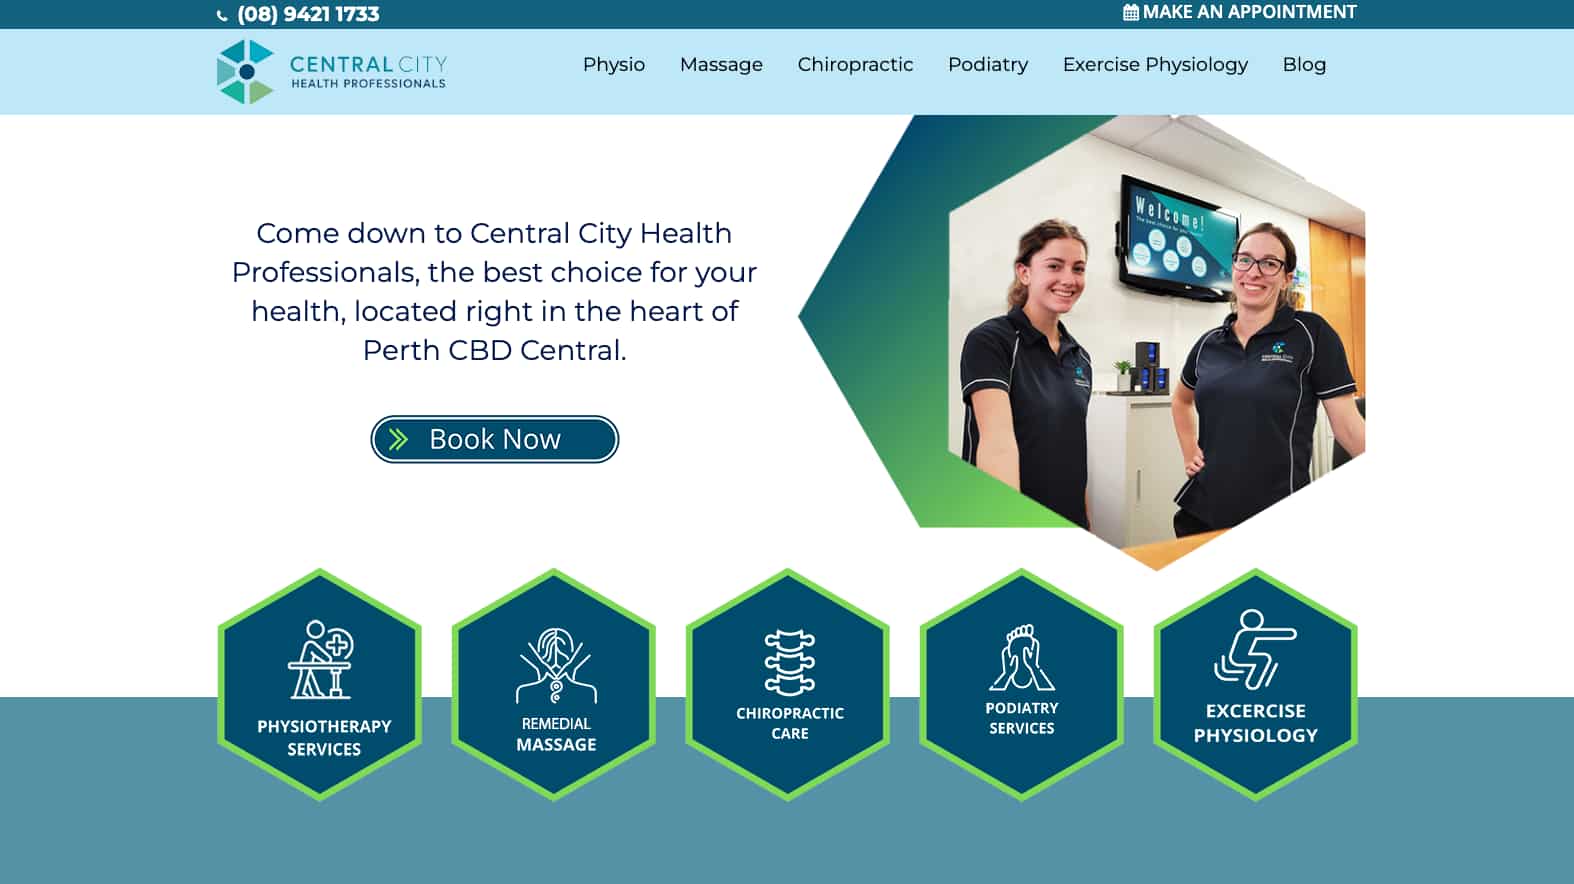 Central City Health Professionals